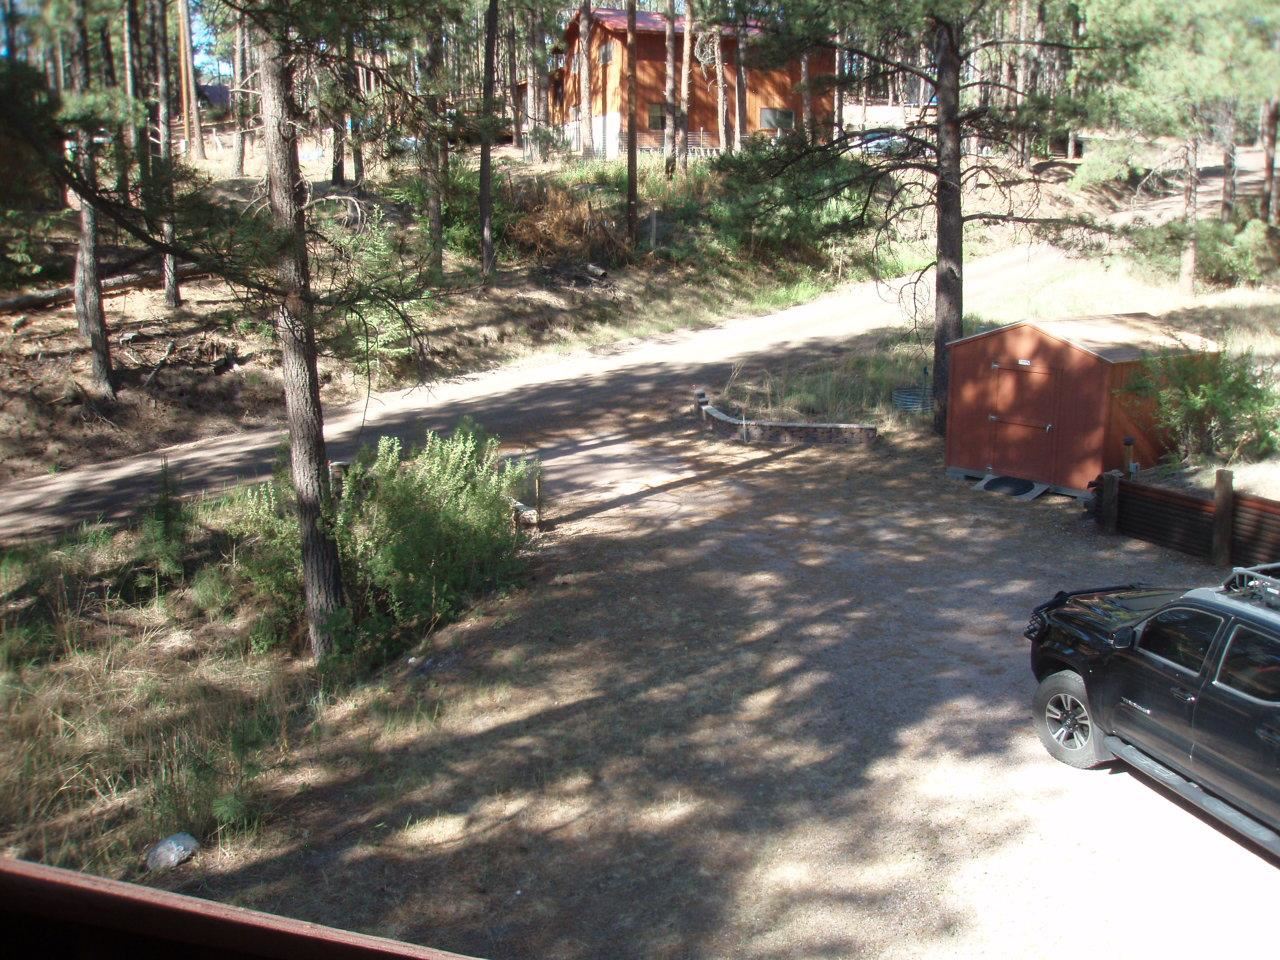 41 Hoven Weep, Jemez Springs, New Mexico 87025, 3 Bedrooms Bedrooms, ,3 BathroomsBathrooms,Residential,For Sale,41 Hoven Weep,202102808